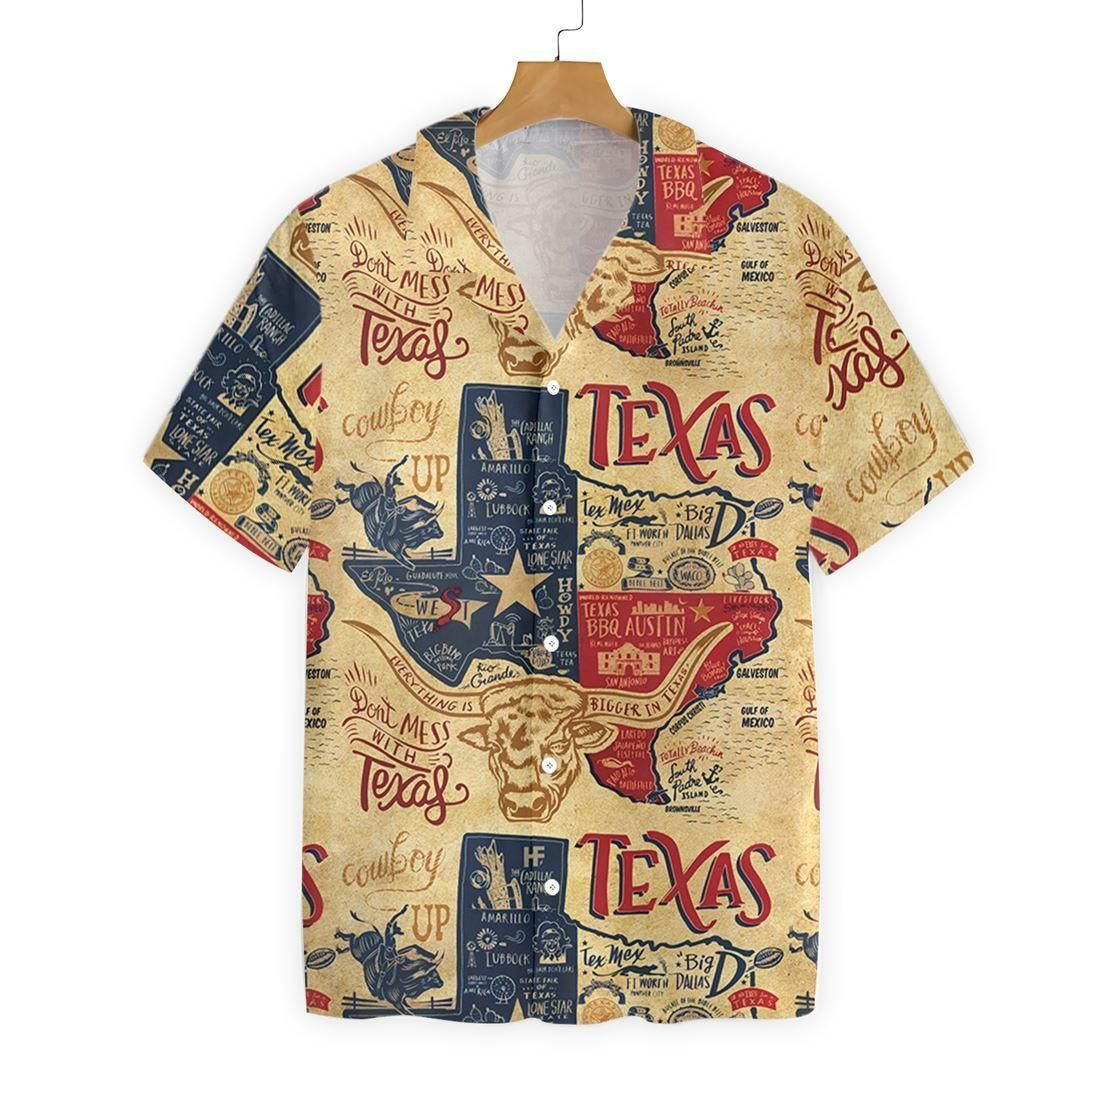 Don't Mess With Texas Longhorns Shirt, Casual Short Sleeve State Of Texas Hawaiian Shirt For Men, Patriotic Texas Gift Ideas PANHW